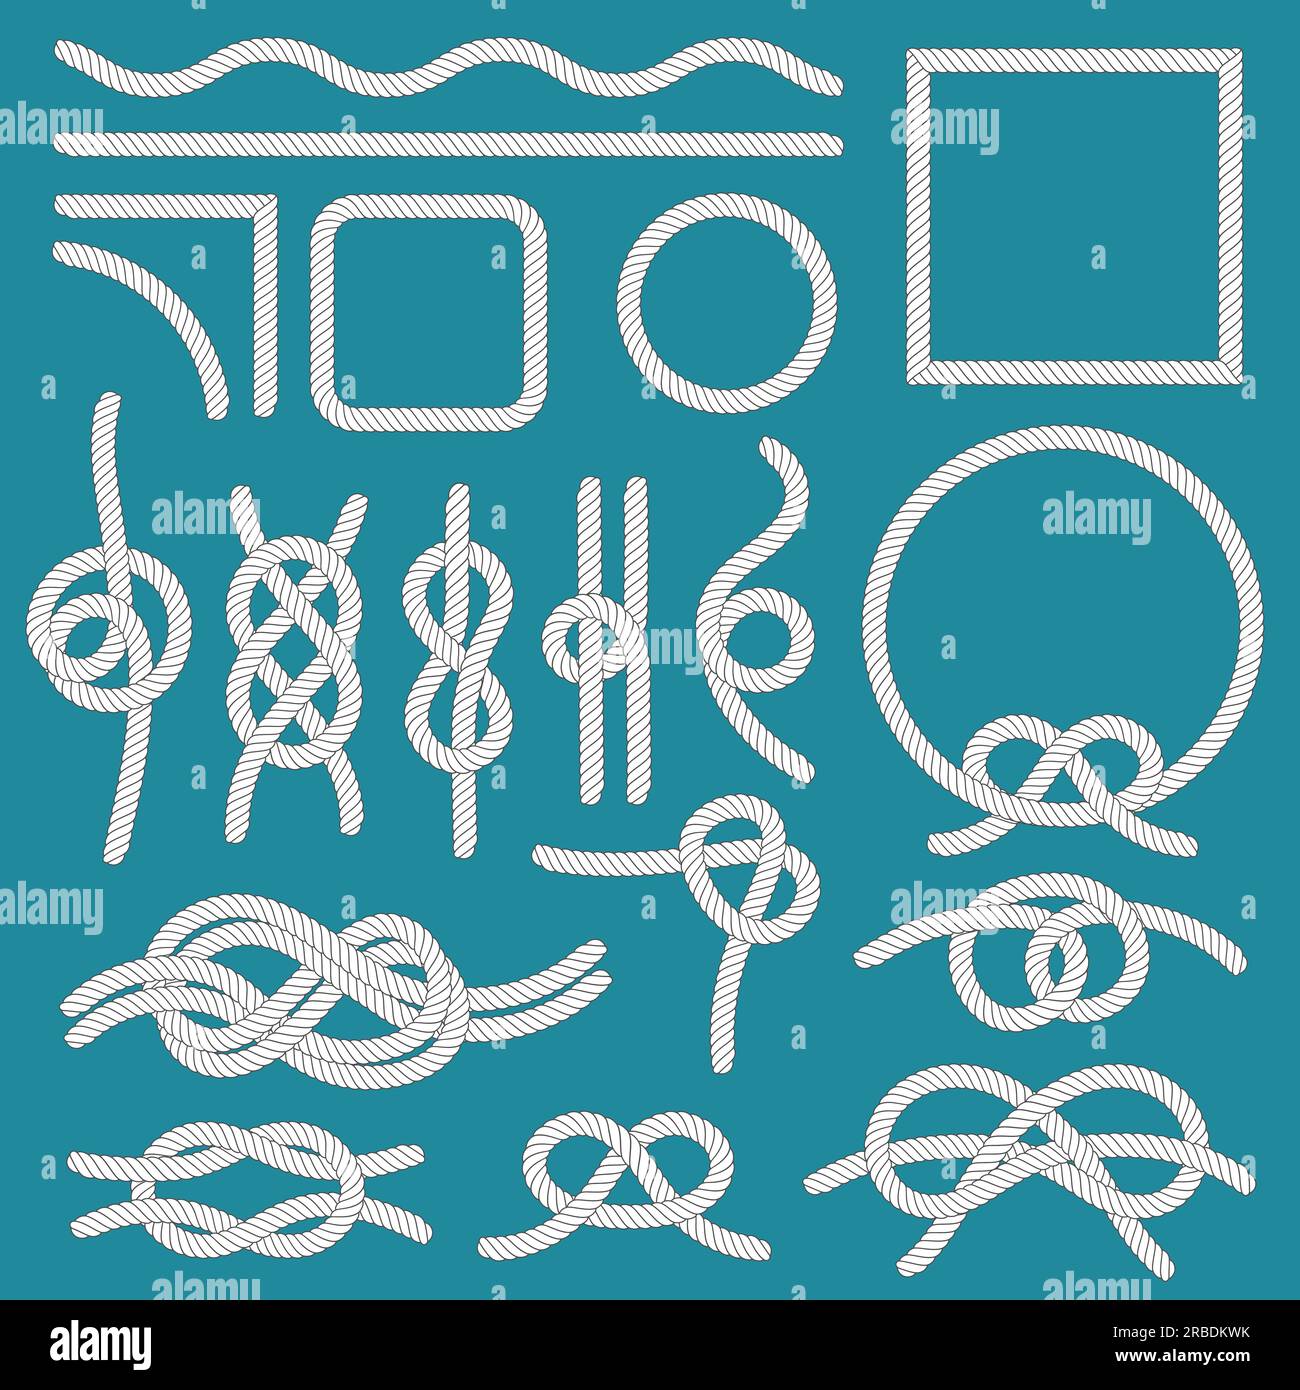 Sea knots Stock Vector Images - Page 2 - Alamy